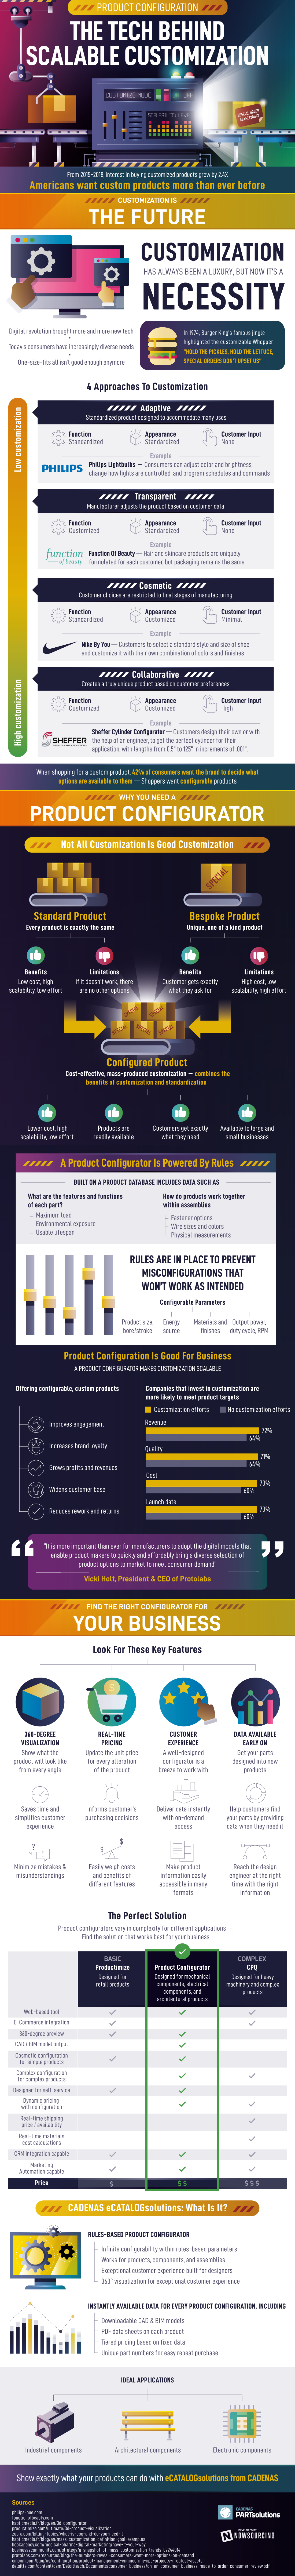 An infographic detailing how a product configurator can enable scalable customization.